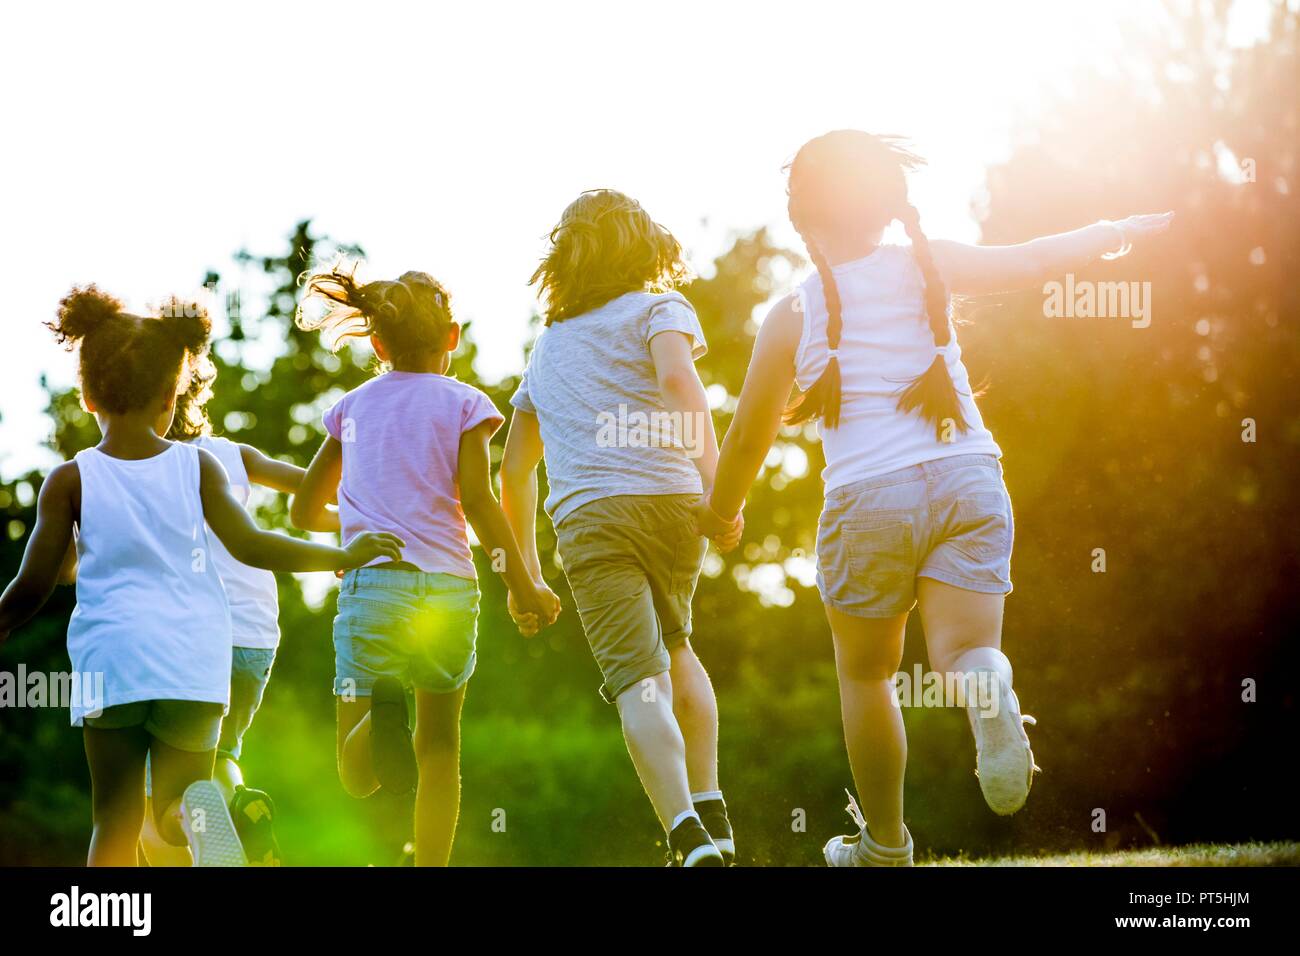 Children holding hands and running in park. Stock Photo